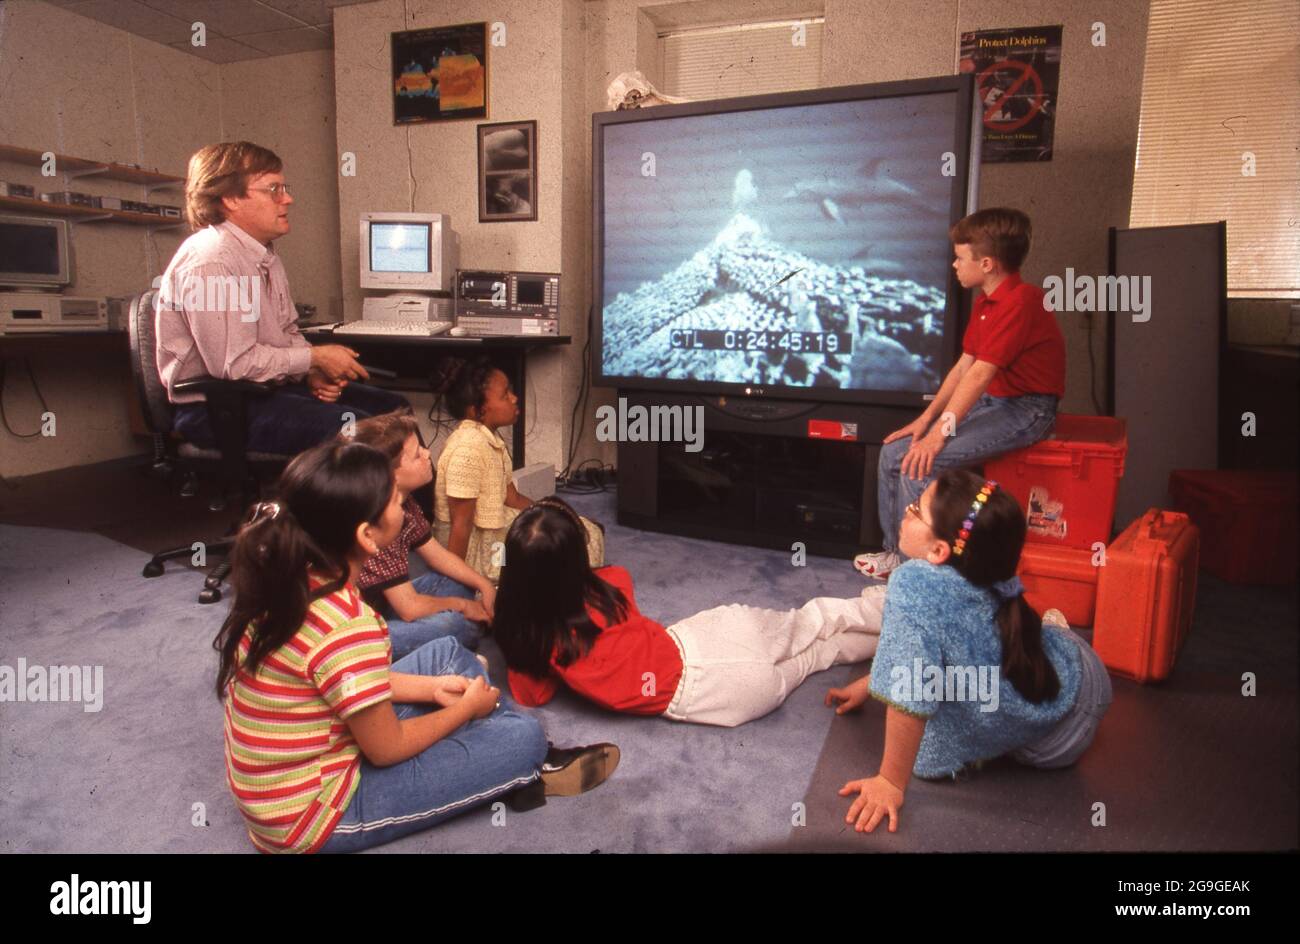 Texas USA, March 1998: Middle school students watch a live feed from an under-sea exploratory craft during a video science class. ©Bob Daemmrich Stock Photo